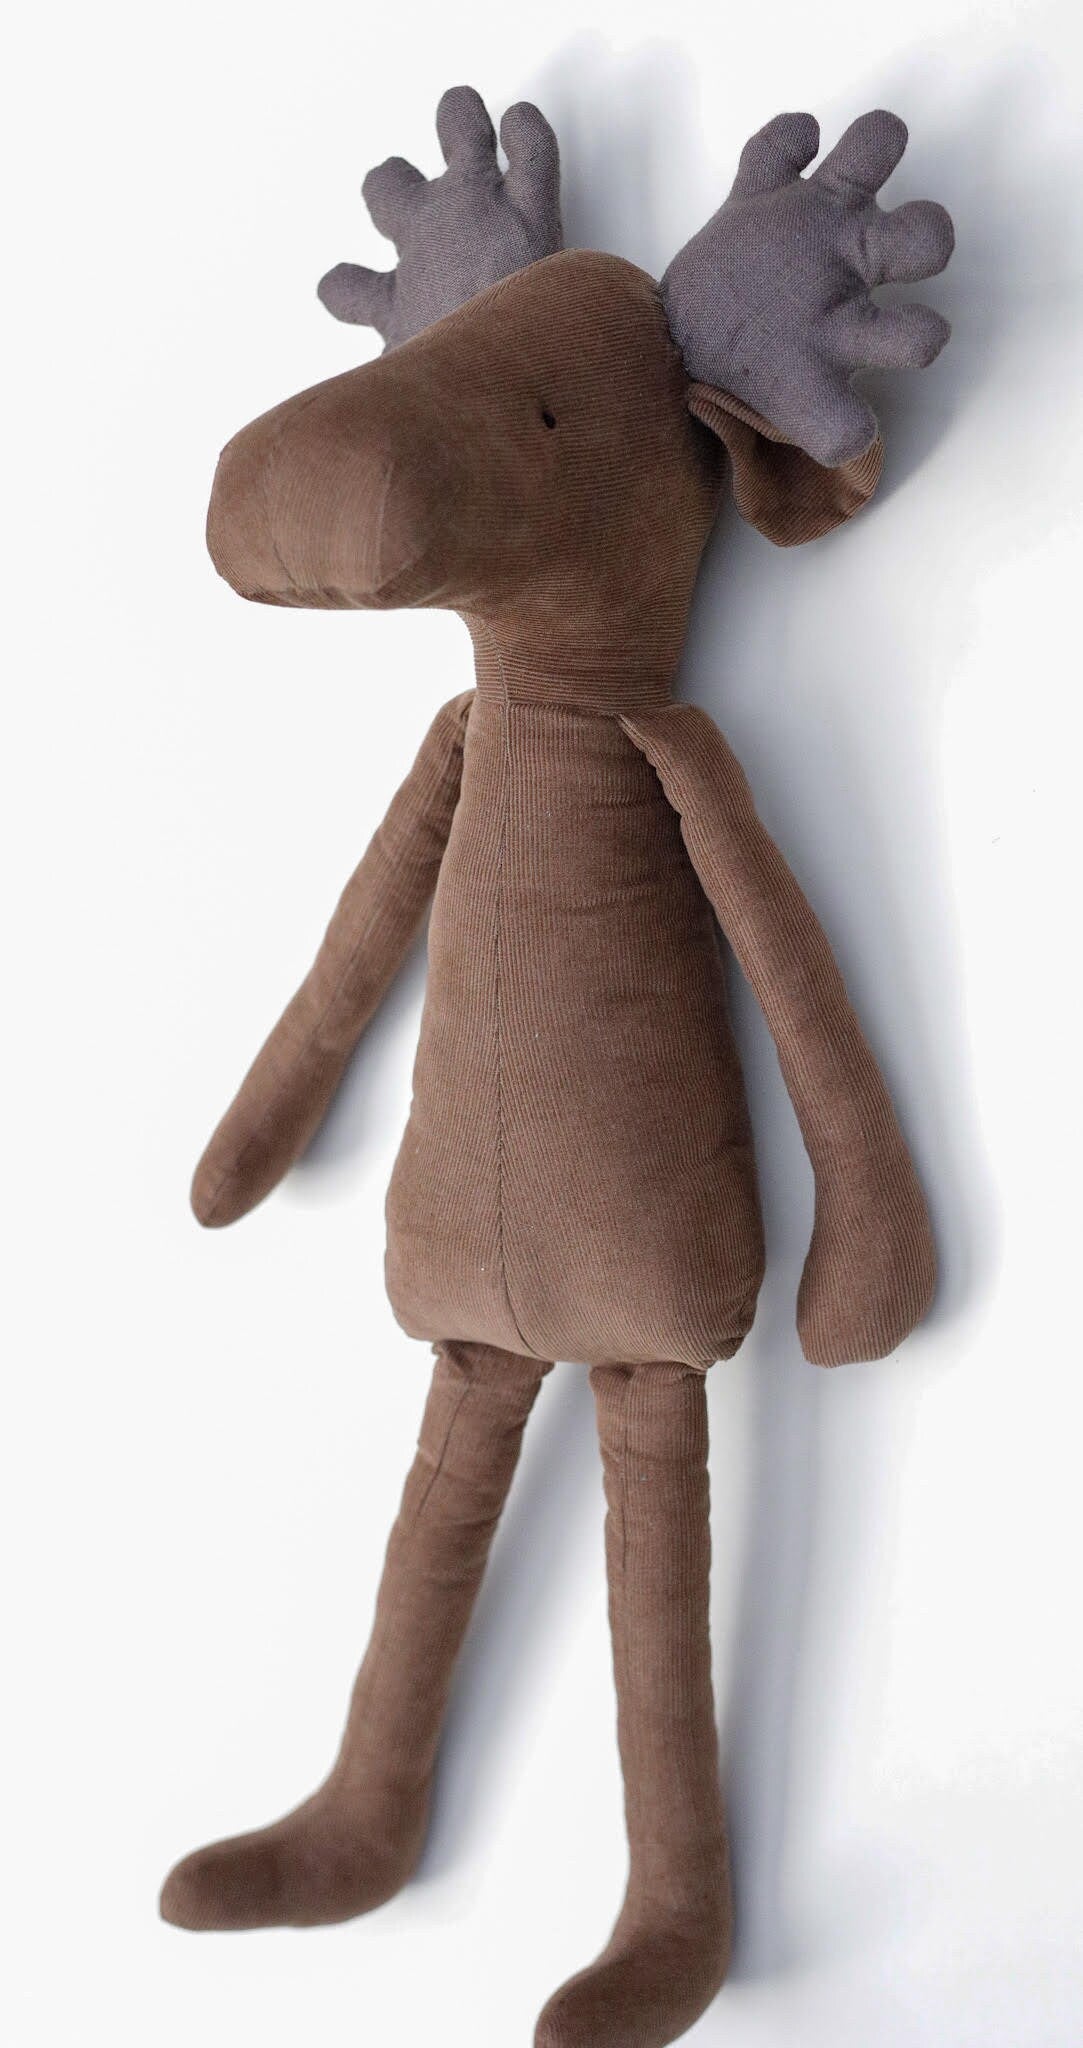 55 cm Moose making kit without any pattern or tutorial